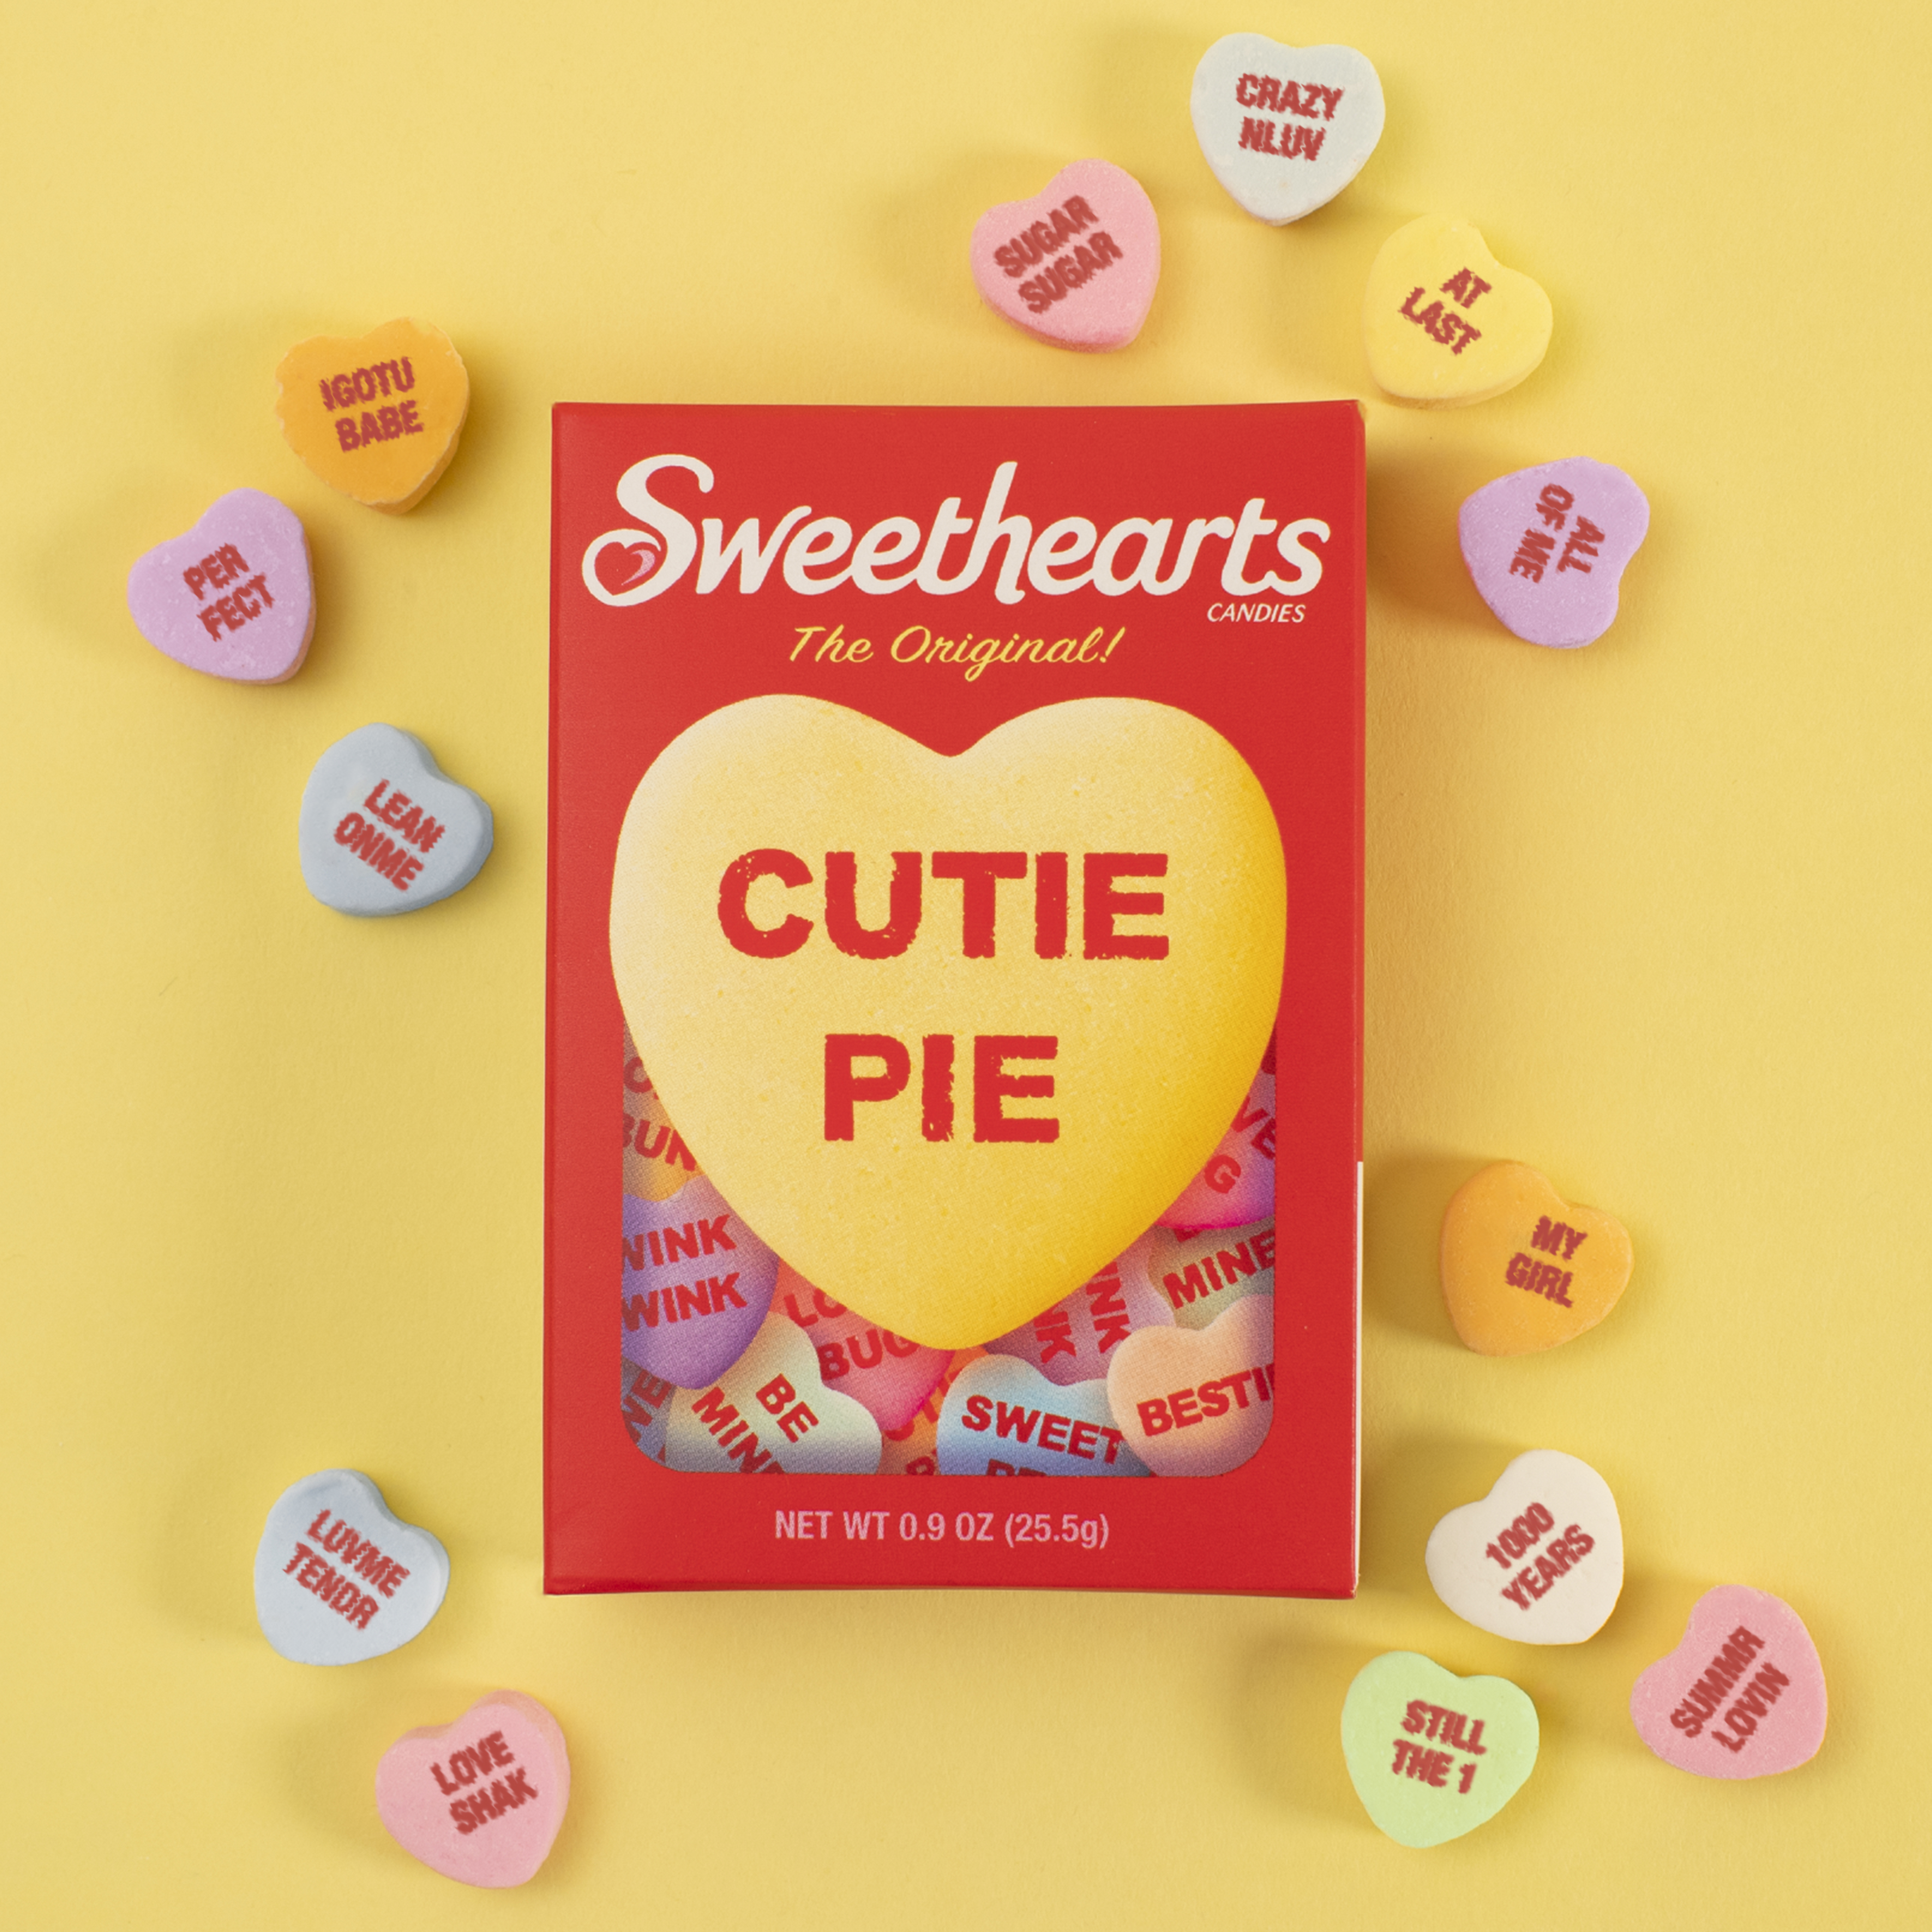 Iconic Sweethearts conversation hearts have new, musical things to say for  Valentine's Day 2021 